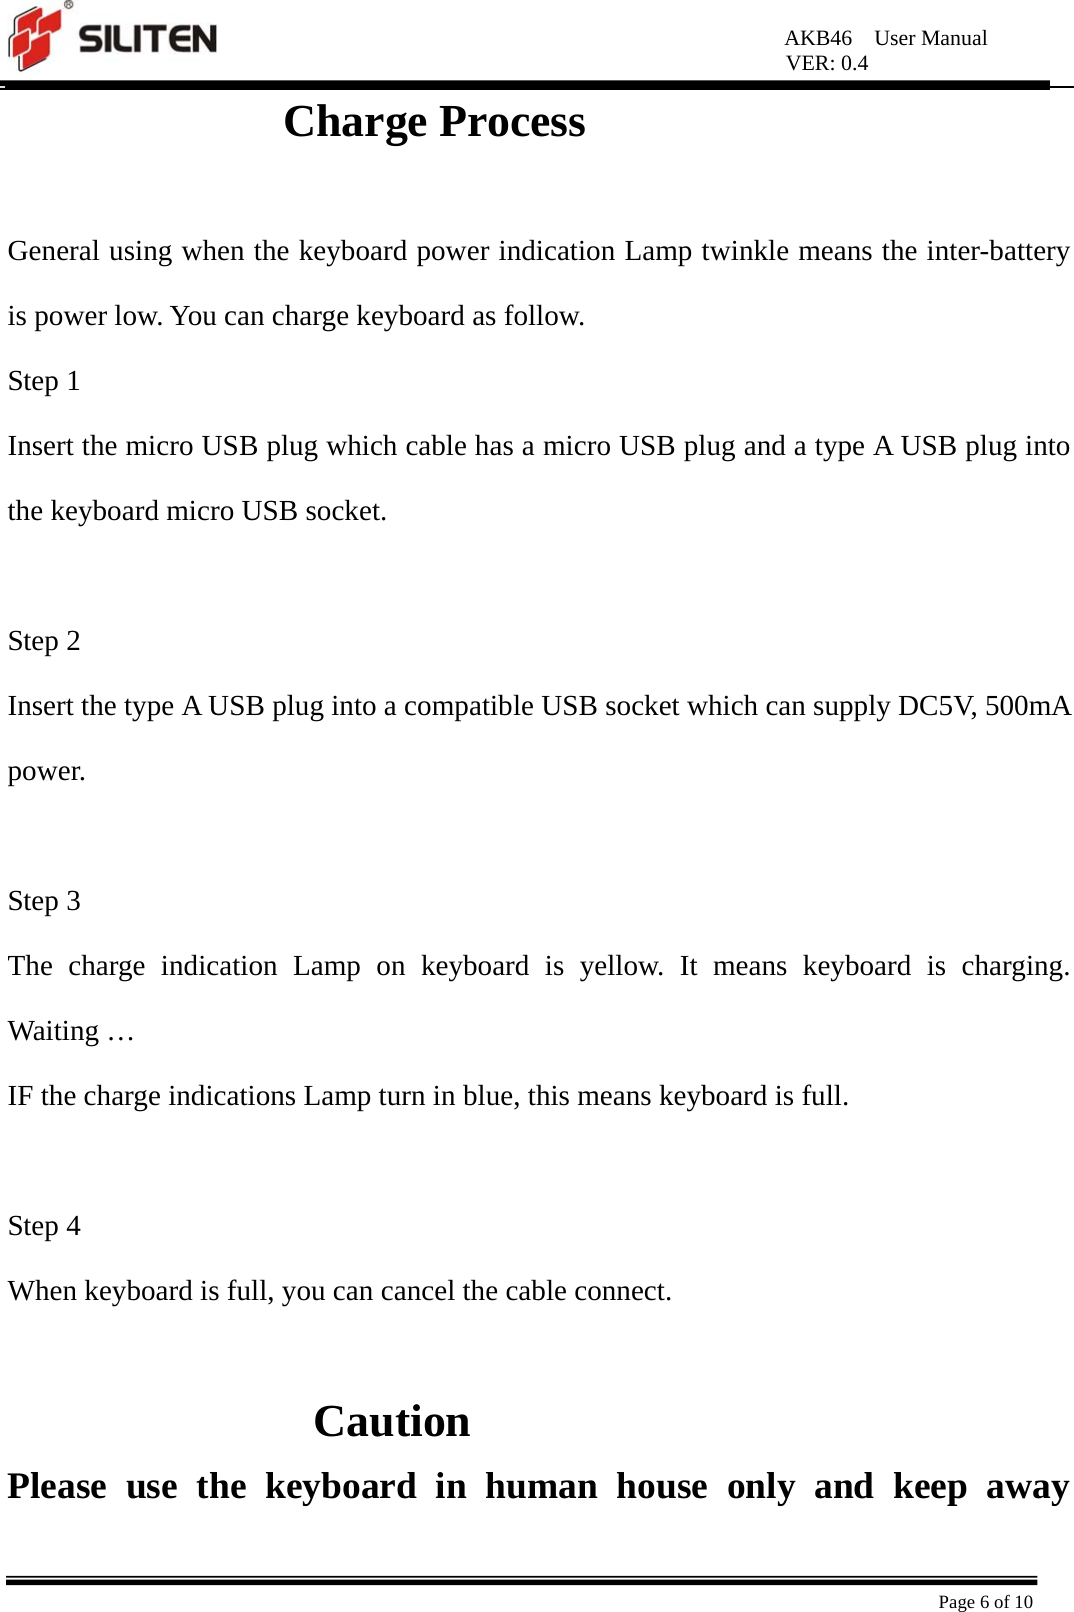 AKB46  User Manual VER: 0.4  Page 6 of 10          Charge Process  General using when the keyboard power indication Lamp twinkle means the inter-battery is power low. You can charge keyboard as follow. Step 1   Insert the micro USB plug which cable has a micro USB plug and a type A USB plug into the keyboard micro USB socket.  Step 2 Insert the type A USB plug into a compatible USB socket which can supply DC5V, 500mA power.  Step 3 The charge indication Lamp on keyboard is yellow. It means keyboard is charging. Waiting …   IF the charge indications Lamp turn in blue, this means keyboard is full.    Step 4 When keyboard is full, you can cancel the cable connect.  Caution Please use the keyboard in human house only and keep away 